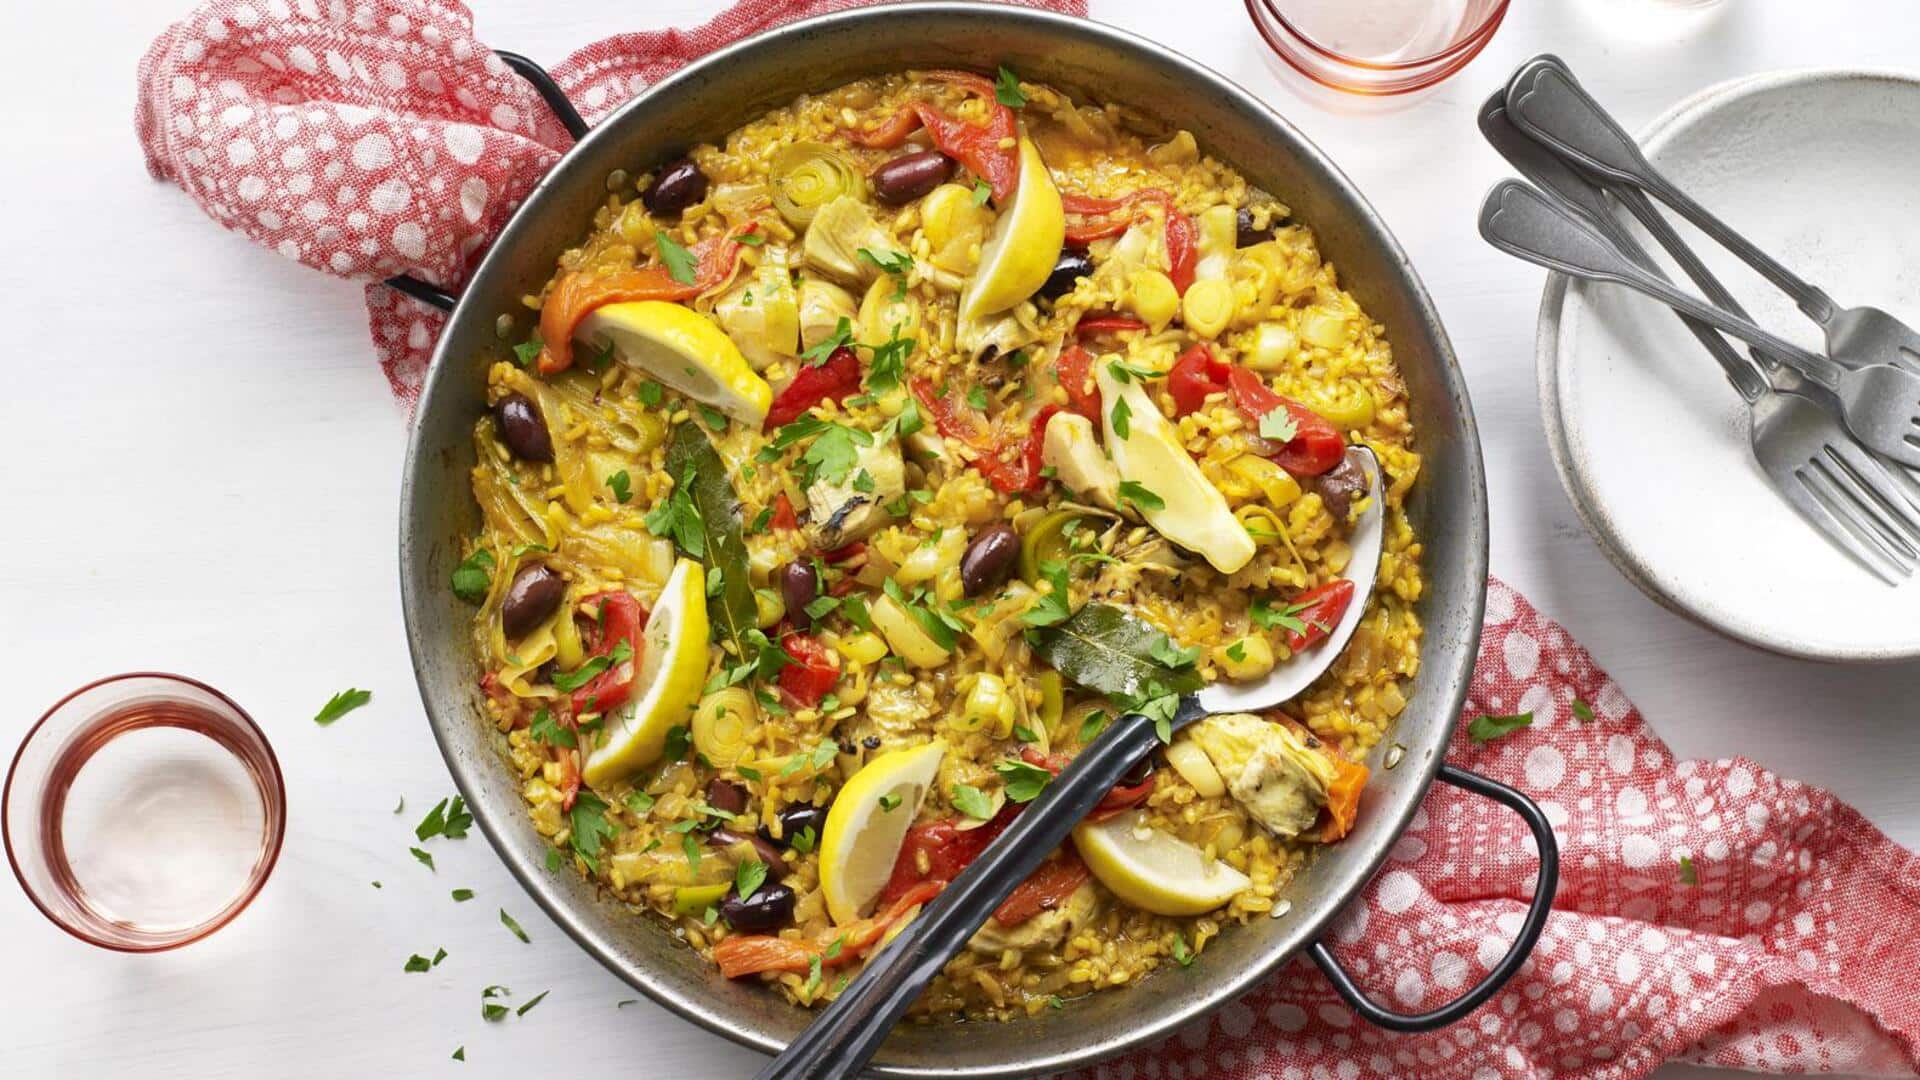 Try this classic vegetarian paella recipe at home